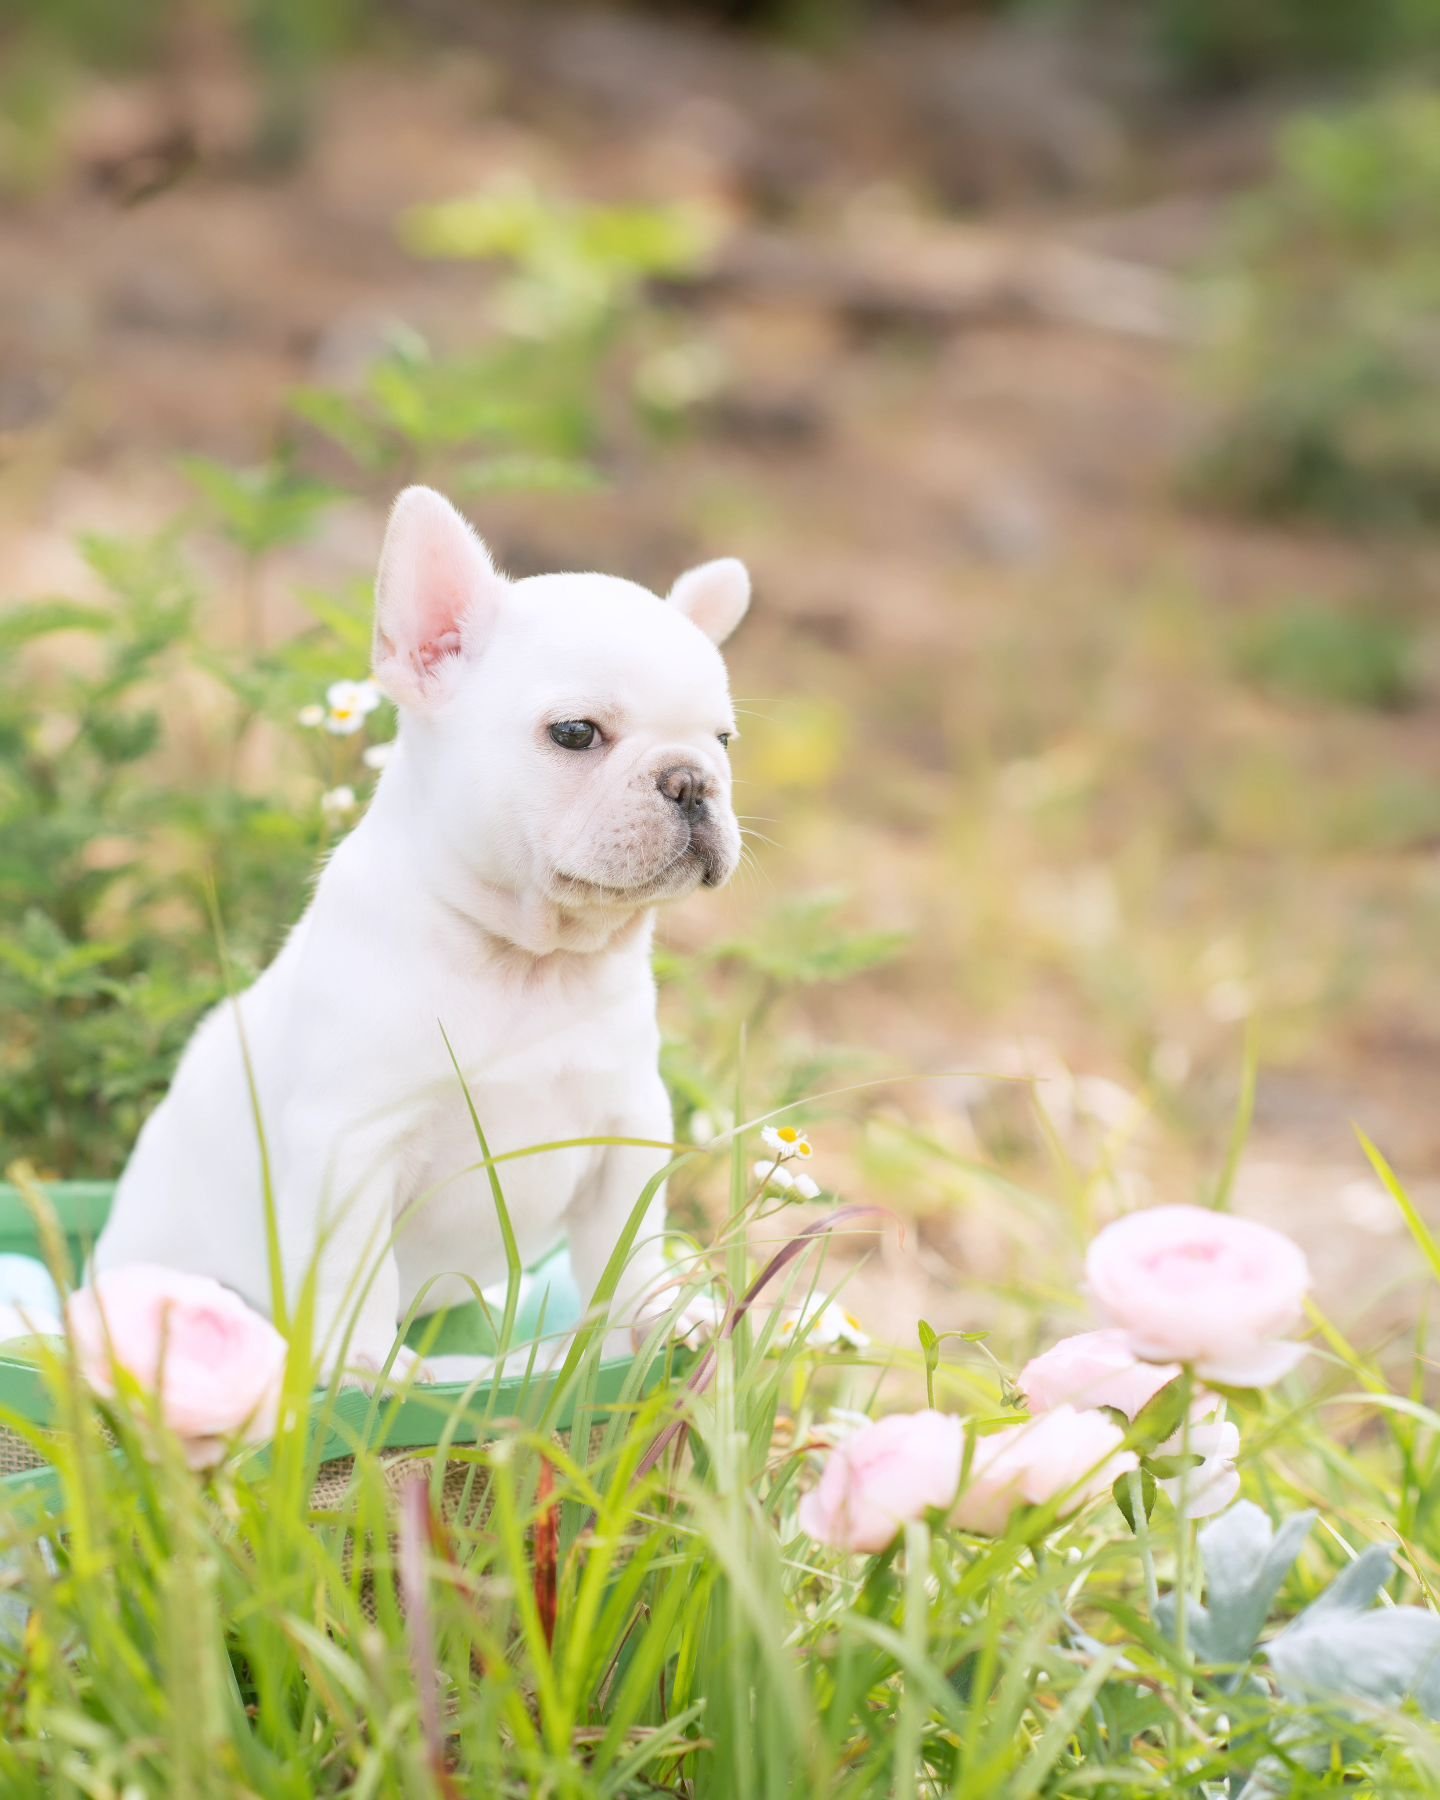 May Adventures Begin 🌸 &quot;Stepping into May with paws and a playful spirit.&quot; 🐾 Let's make memories 🌱
.
.
.
#frenchbulldogpuppies #toppawfrenchies #dogs 
#frenchielove #bulldogbabies #frenchielife #puppylove #frenchiesofinstagram #frenchien